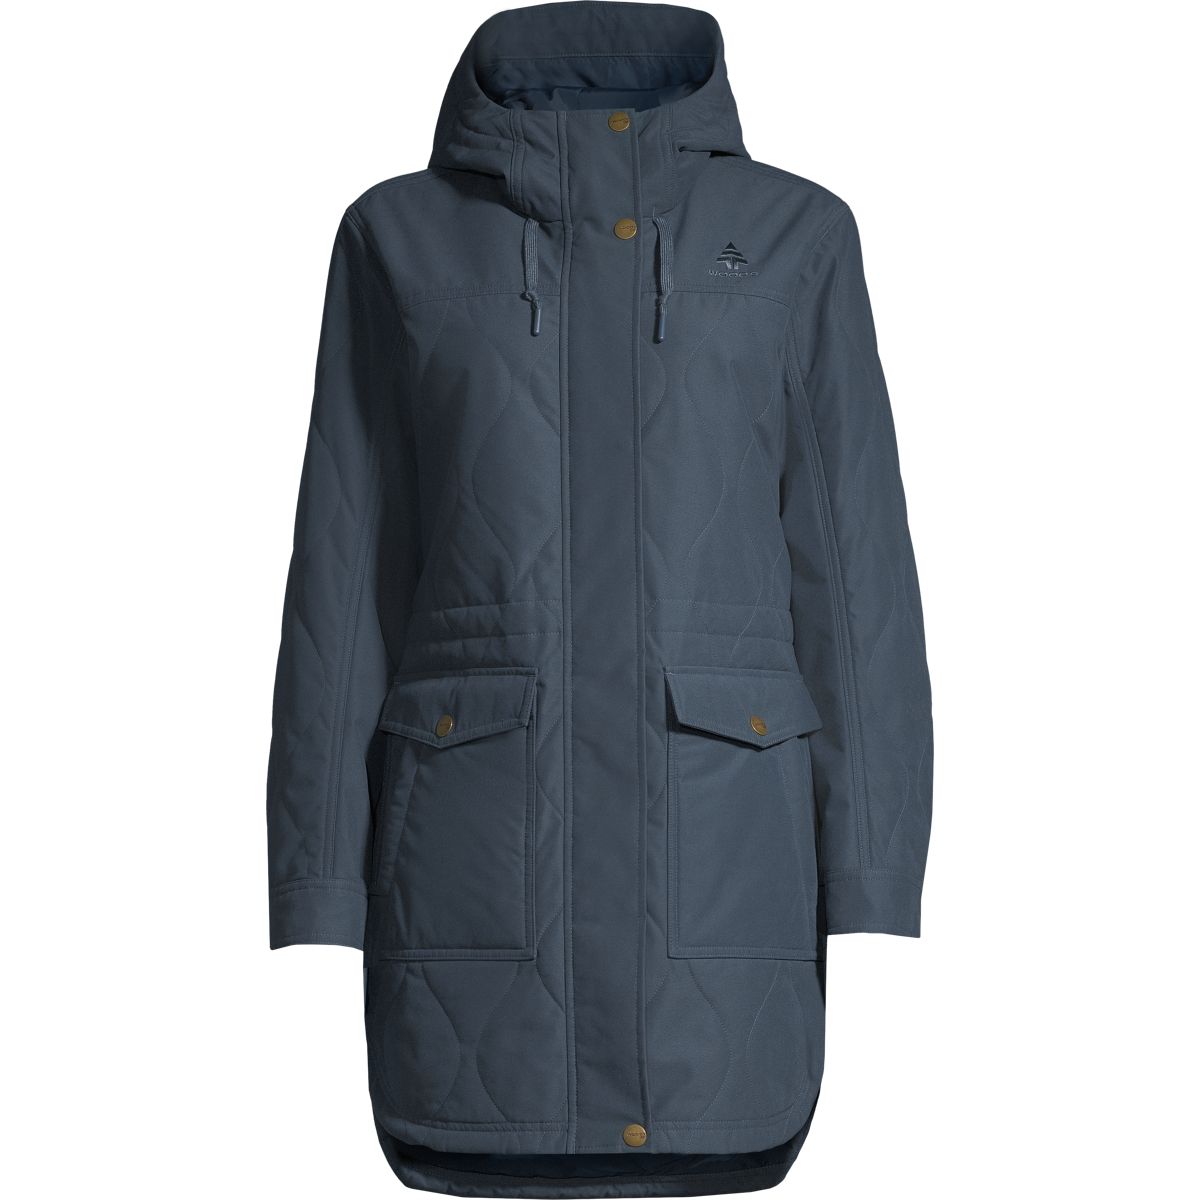 https://media-www.sportchek.ca/product/div-03-softgoods/dpt-76-outerwear/sdpt-02-womens/333590830/woods-women-s-neave-quilted-ins-jkt-s22-mid-navy-304f77cd-2ae5-49de-afbf-ceb084bc40fe-jpgrendition.jpg?imdensity=1&imwidth=1244&impolicy=mZoom